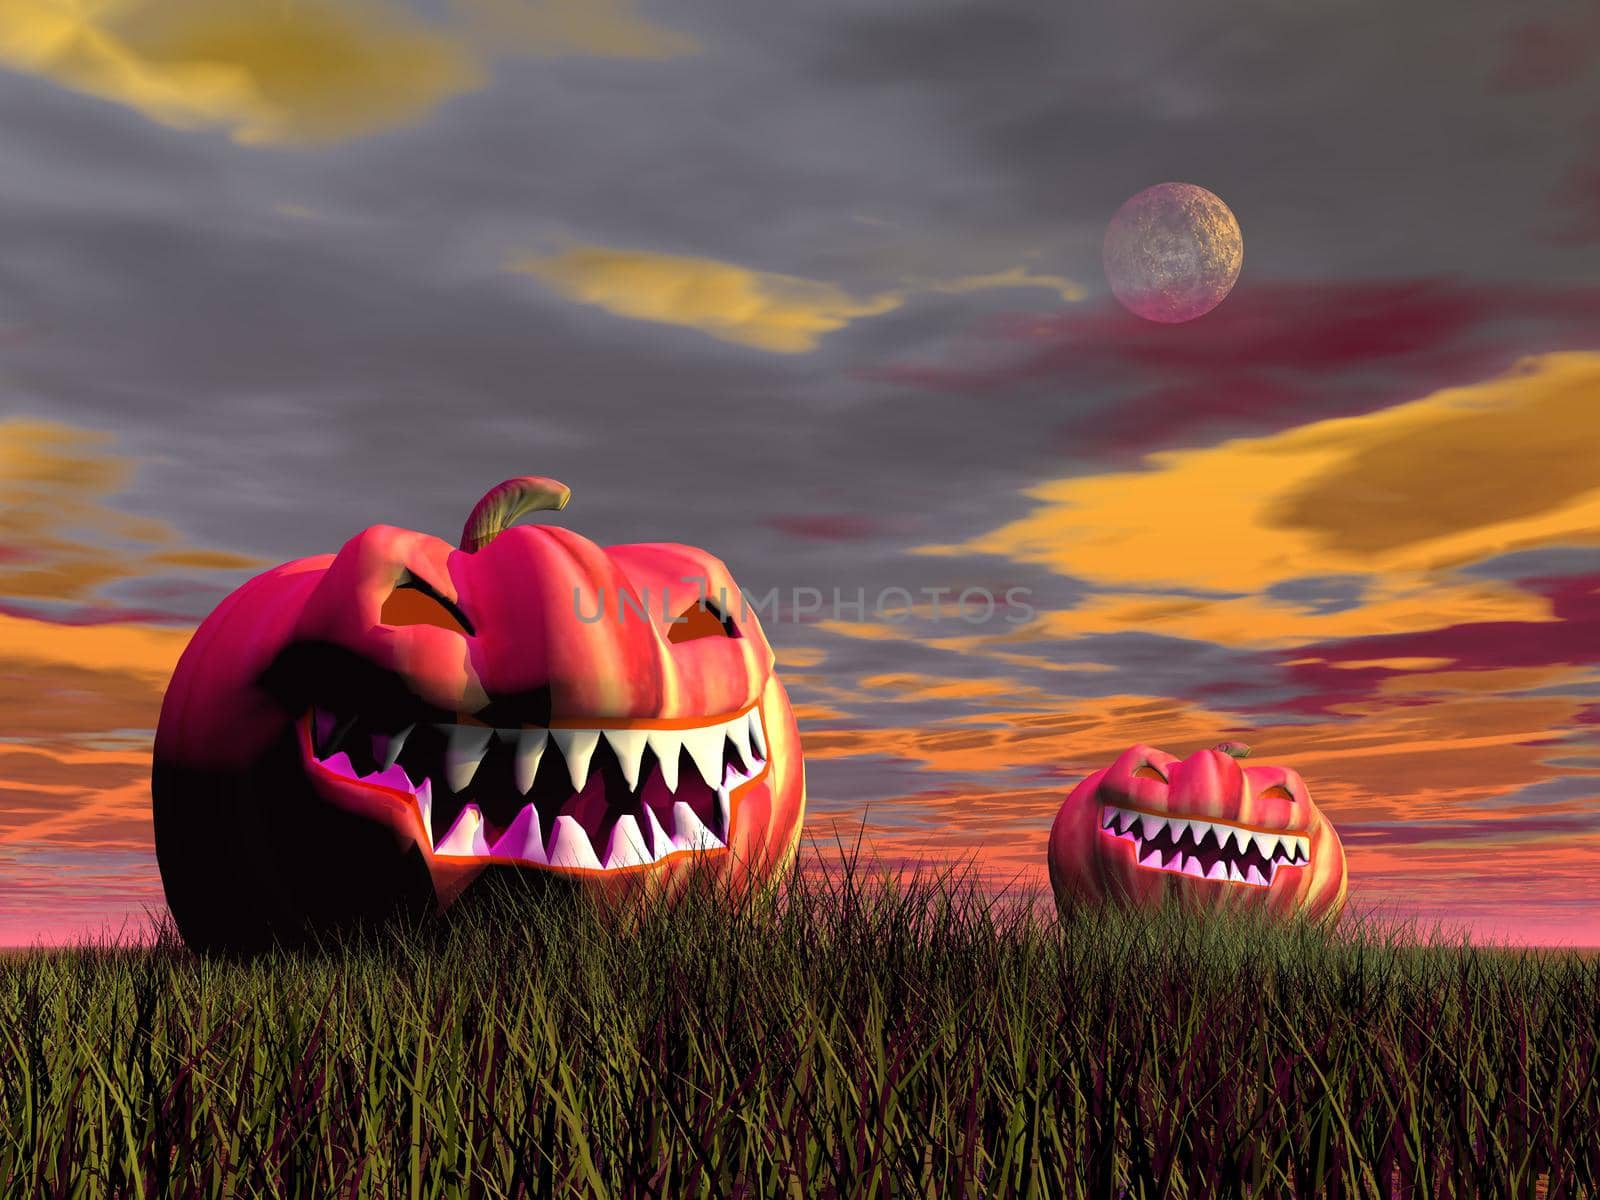 Two orange pumpkins on grass smiling at the full moon for halloween by sunset light